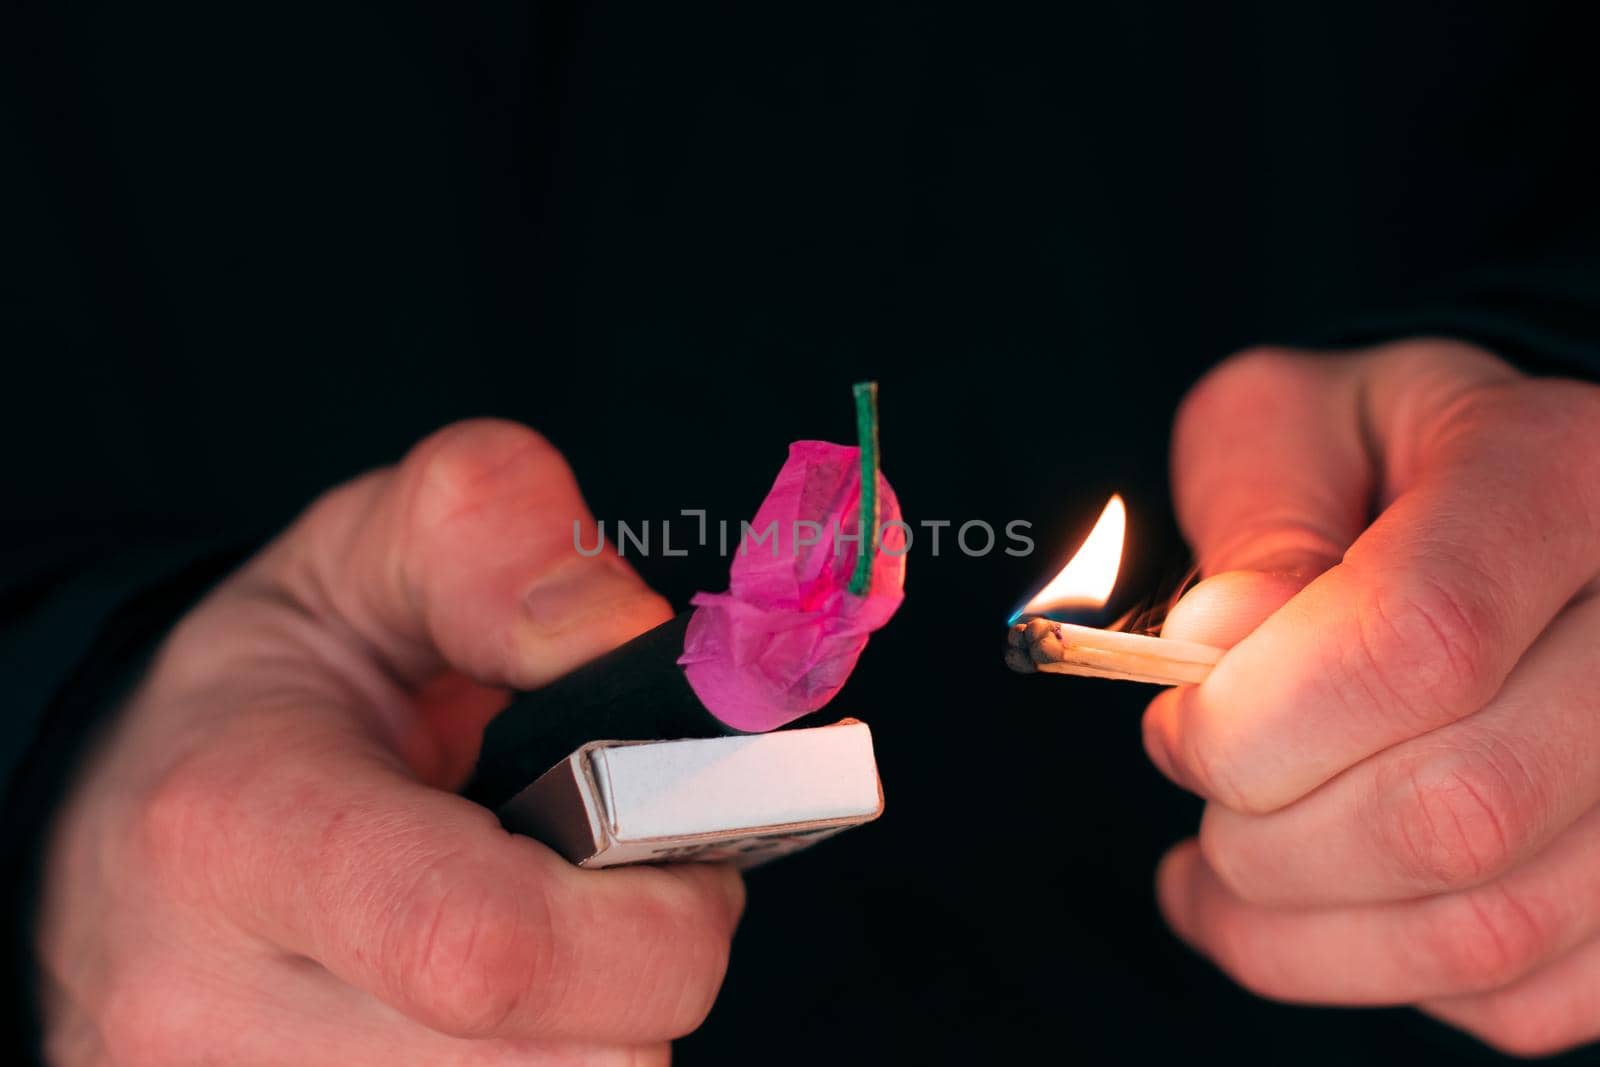 Setting Fire to the Firecracker. Man in Black Clothes Lighting Up the Petard. Pyrotechnics Firing Up with Matches Holding Together with a Matchbox Outdoors